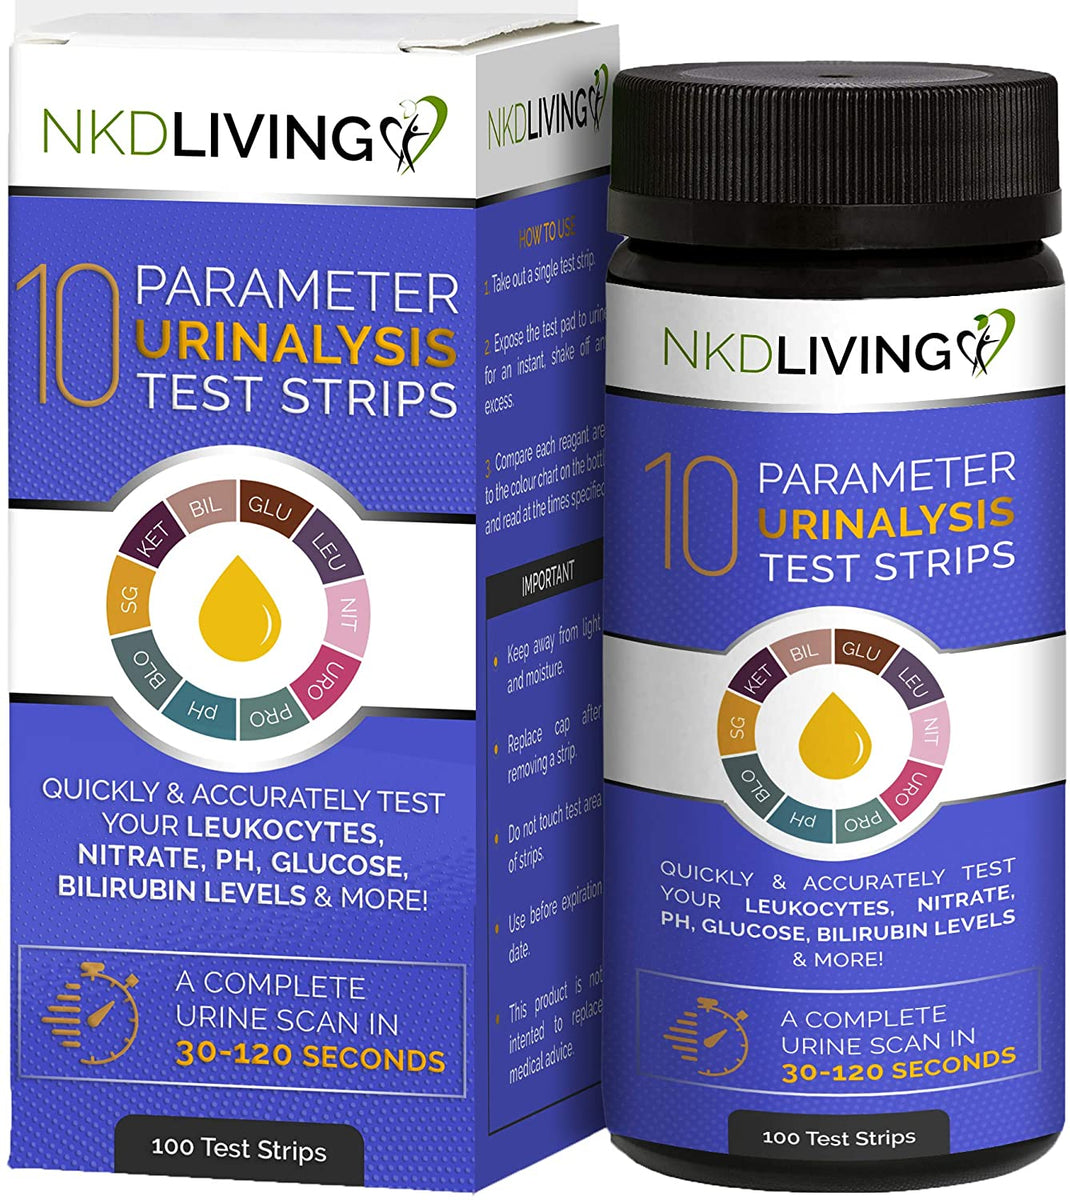 10 Parameter Urinalysis Test Kits 100 Test Strips The Health Store 7333